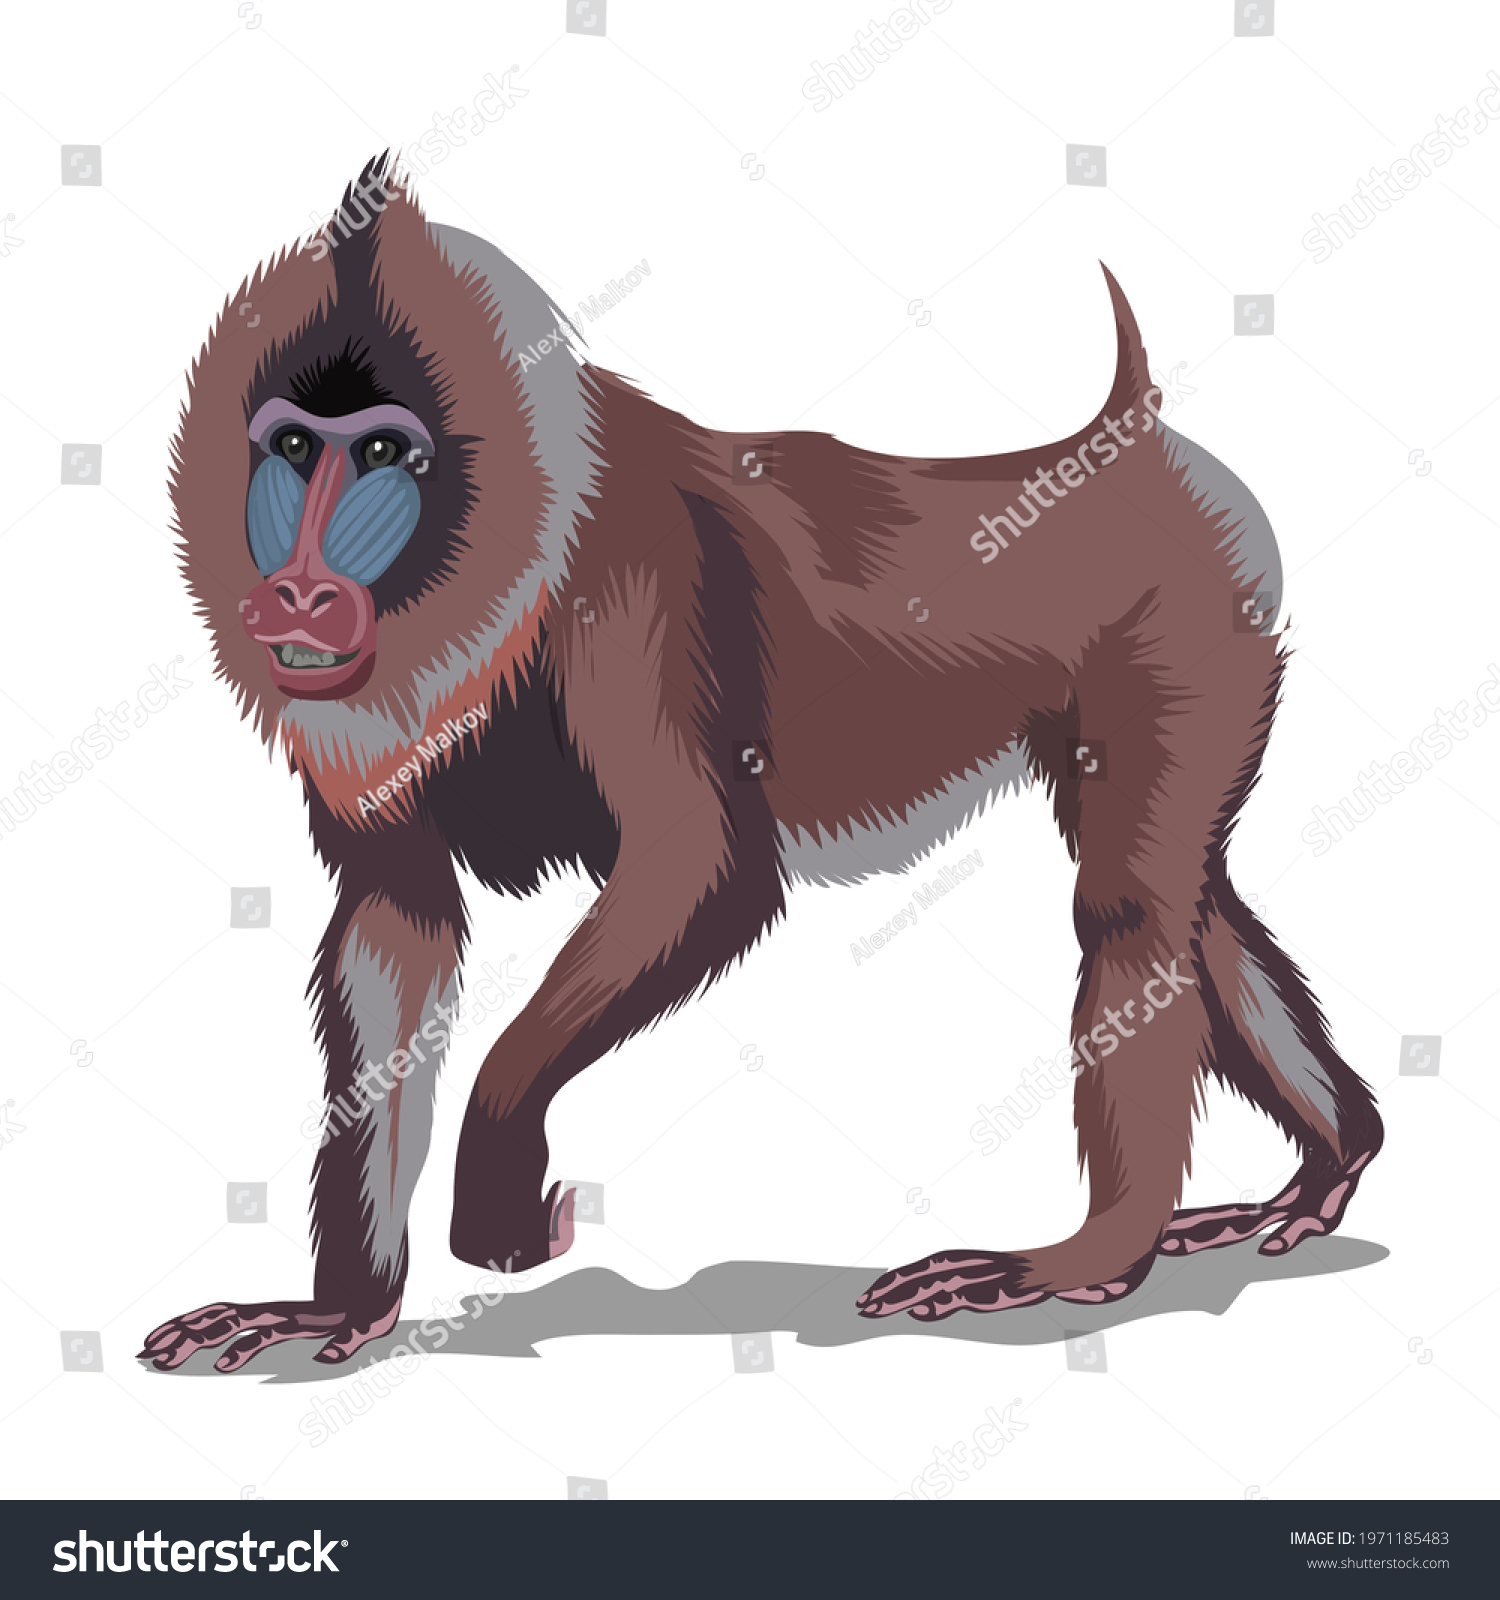 Mandrill or big brown monkey. Isolated in white background. Vector illustration #1971185483